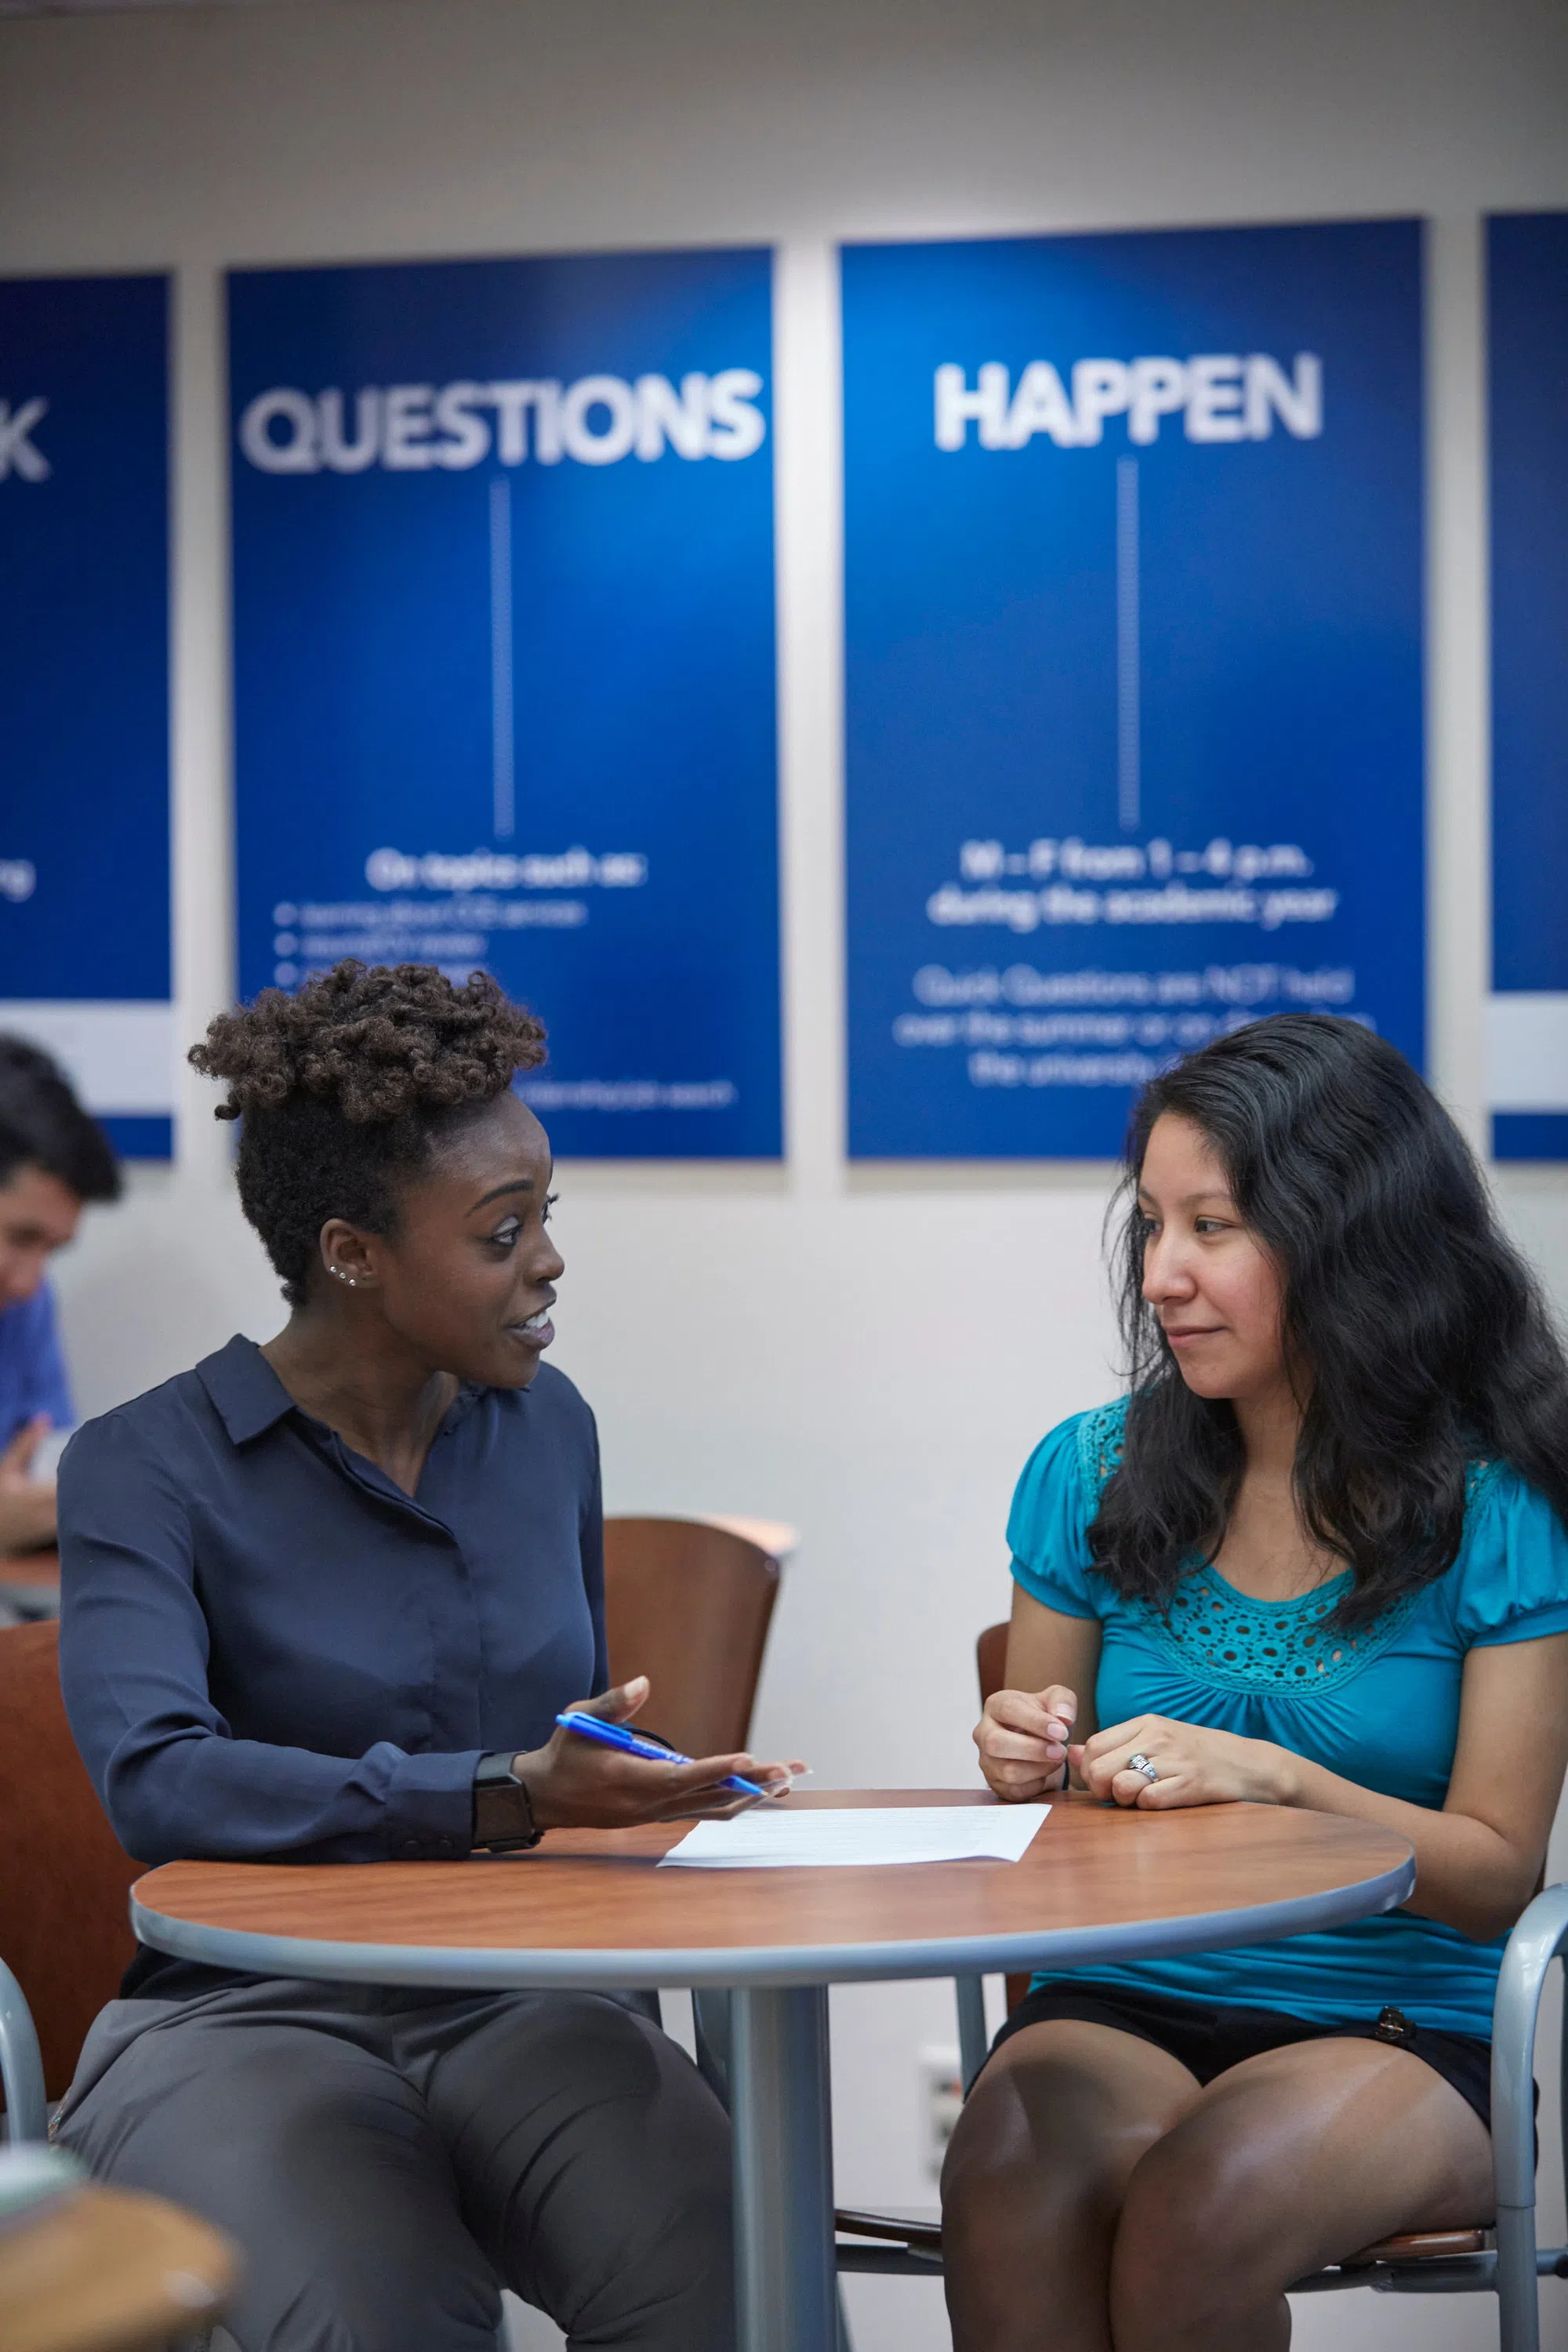 Two women sit at a small round table, there are two blue signs behind them that read "Questions Happen".